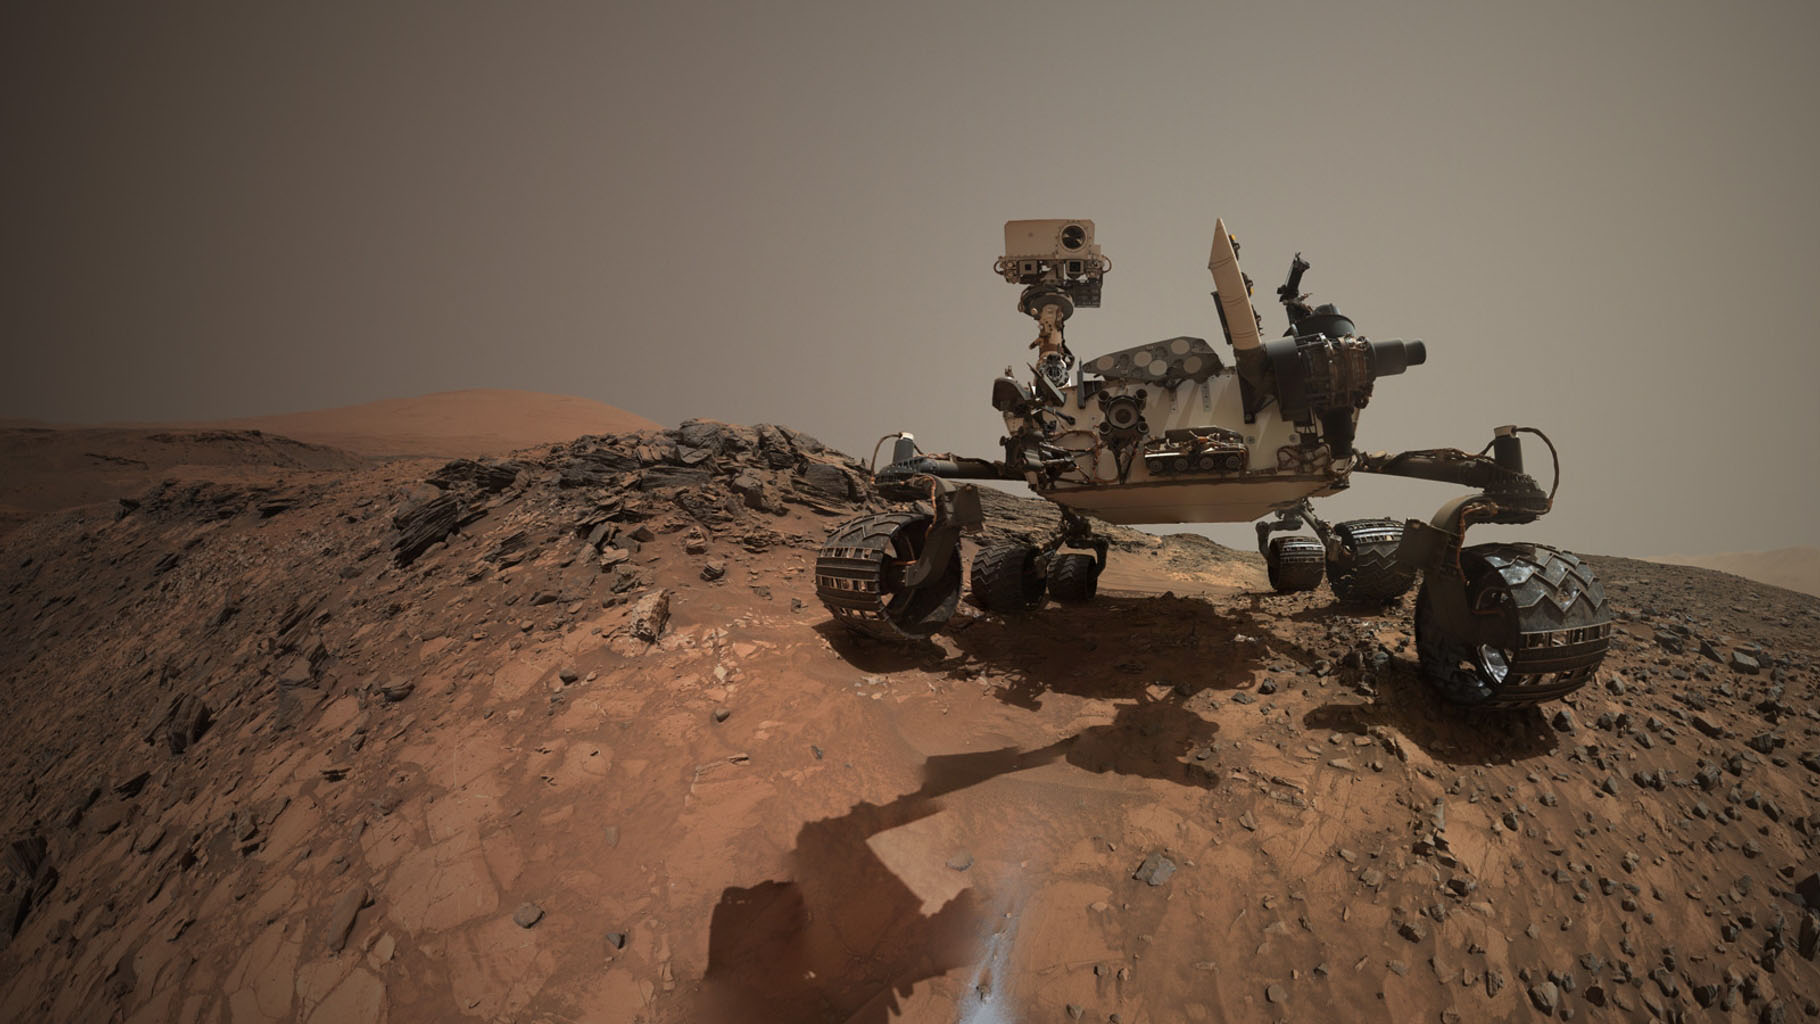 This low-angle self-portrait of NASA's Curiosity Mars rover shows the vehicle at the site from which it reached down to drill into a rock target called 'Buckskin' on lower Mount Sharp.